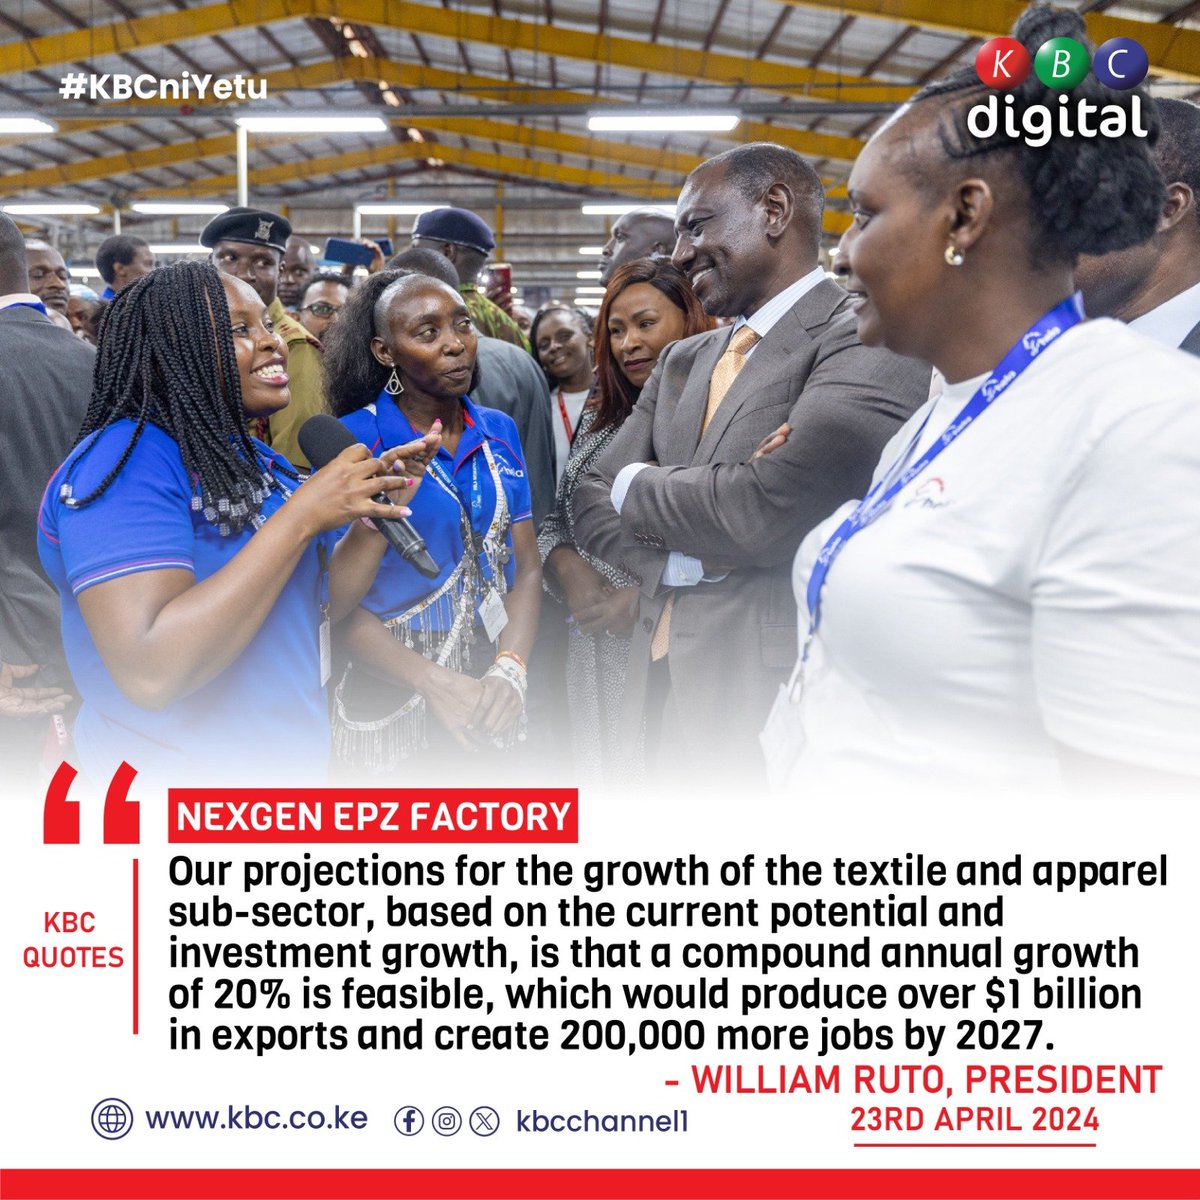 ‘Our projections for the growth of the textile and apparel sub-sector, based on the current potential and investment growth, is that a compound annual growth of 20% is feasible, which would produce over $1 billion in exports and create 200,000 more jobs by 2027.' - William